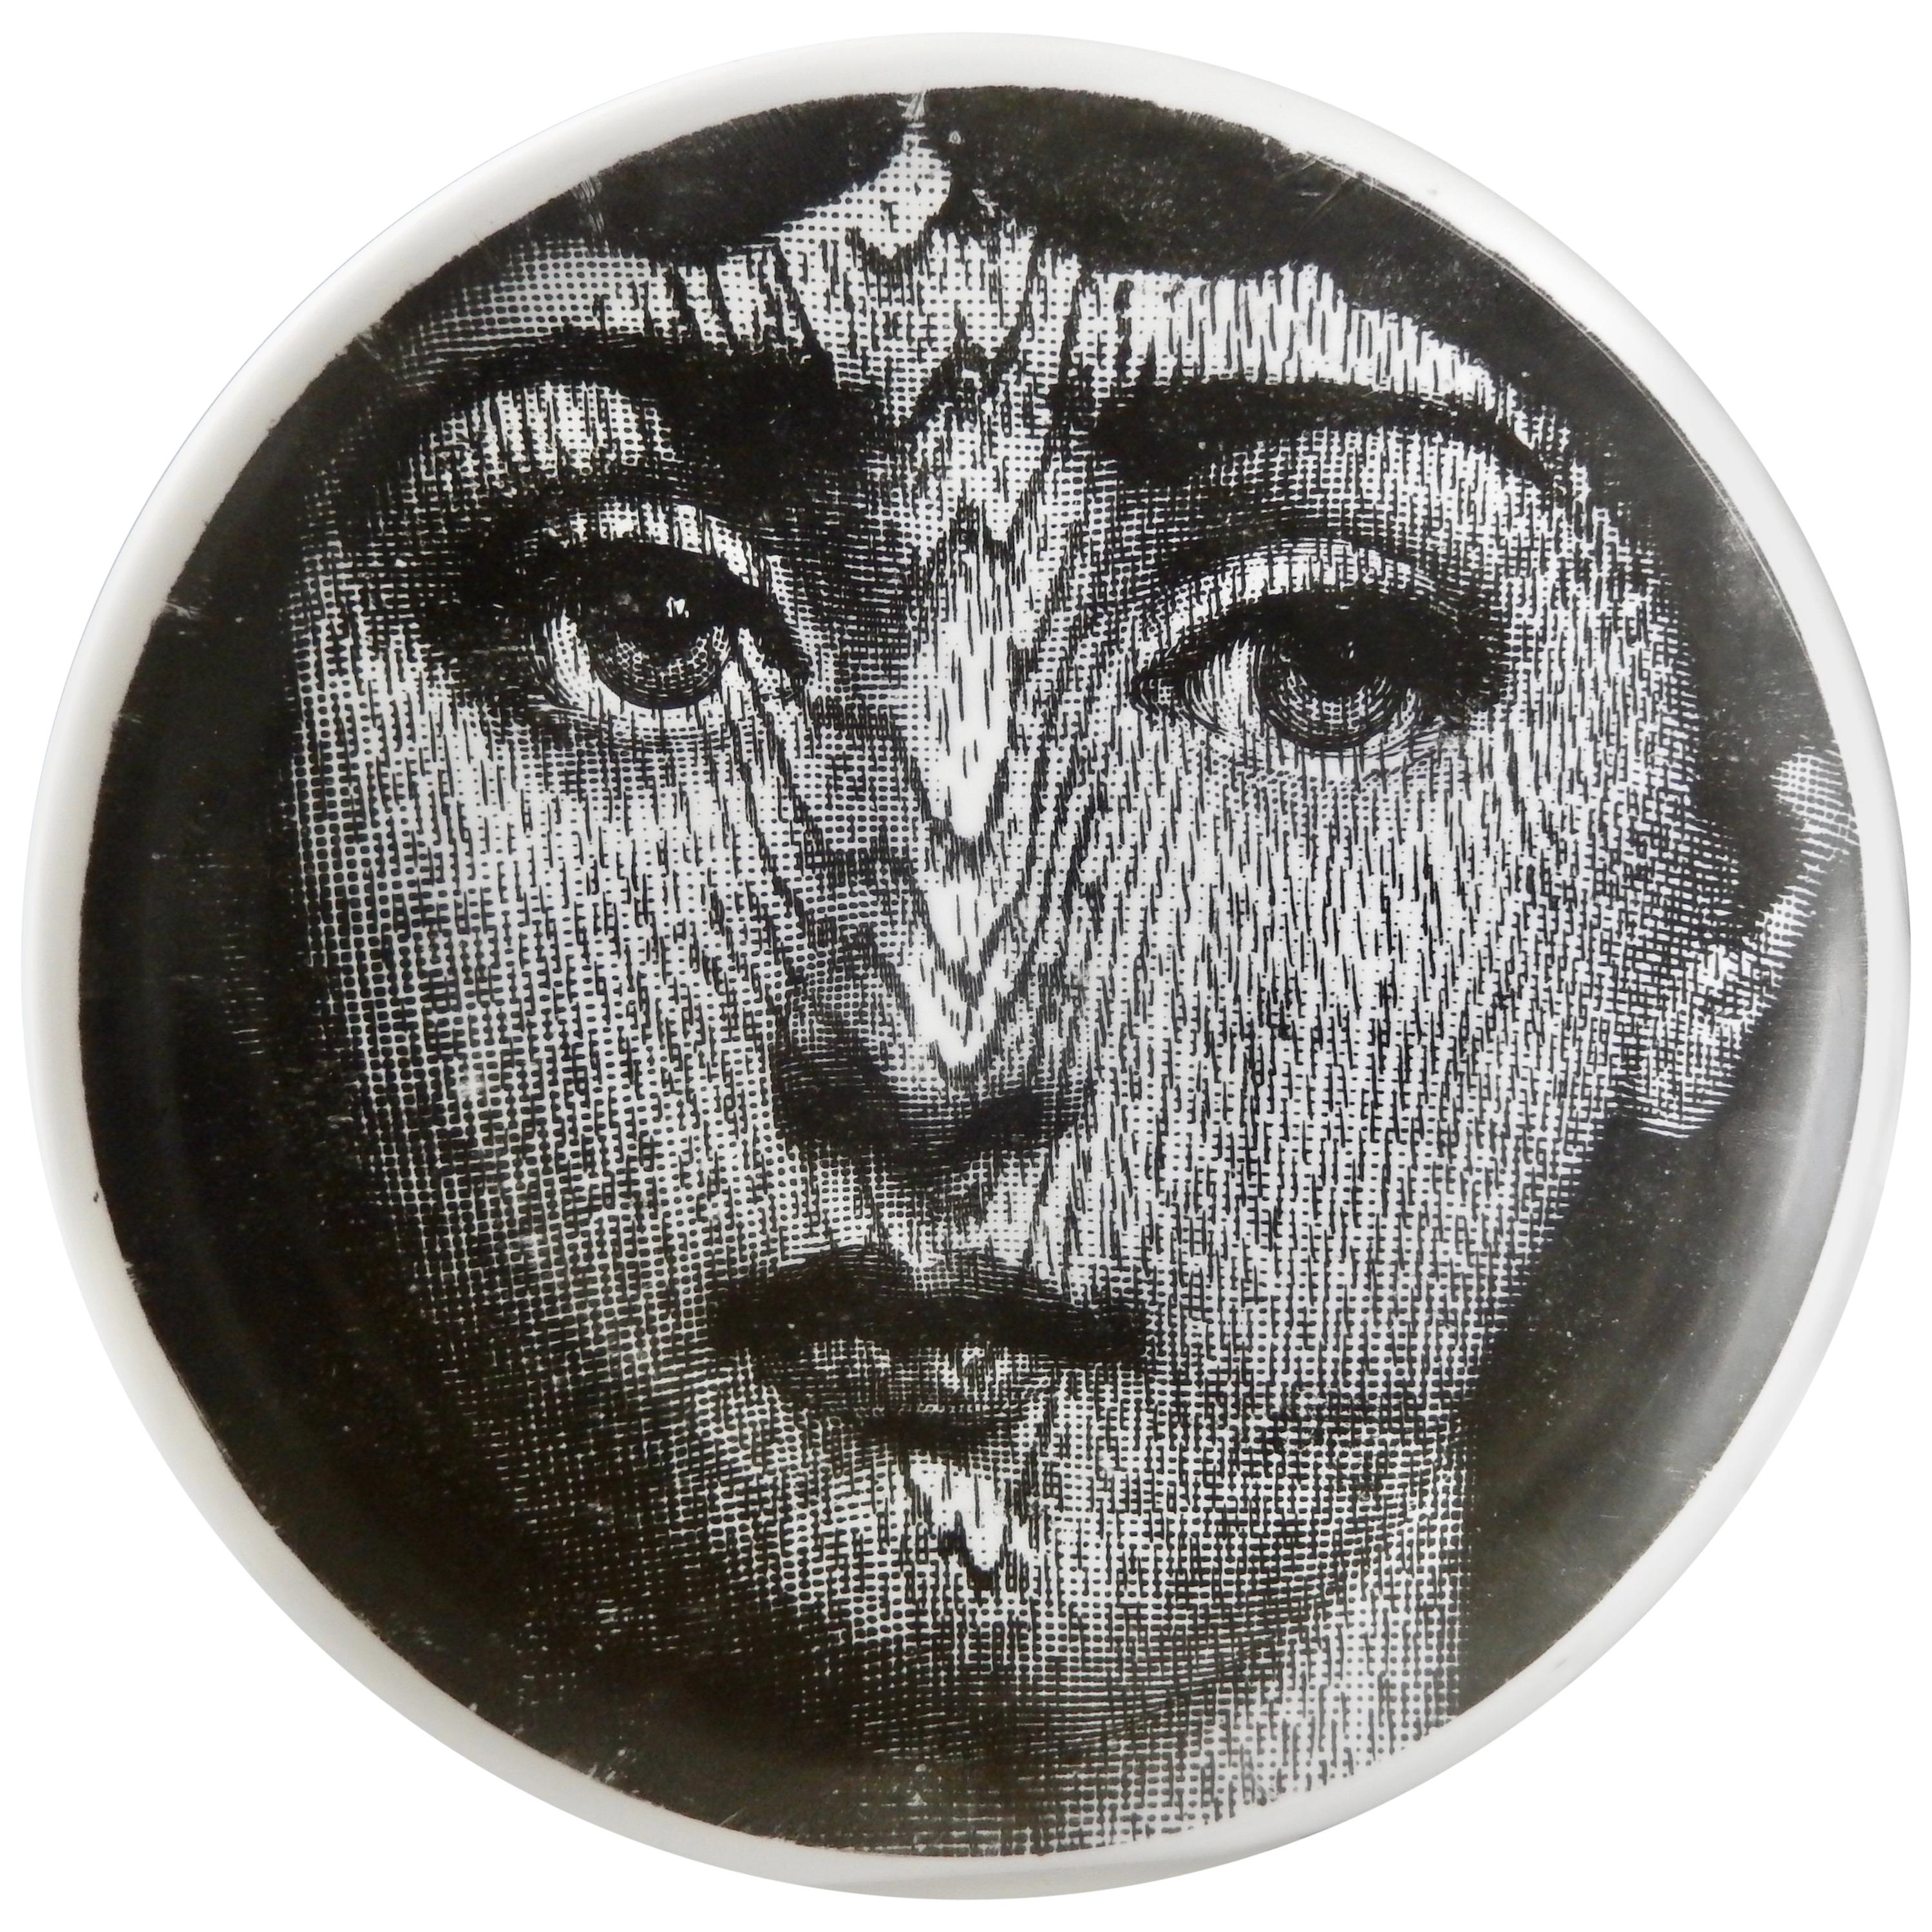 Midcentury Fornasetti Face Plate, Tema e Variazione N90 For Sale